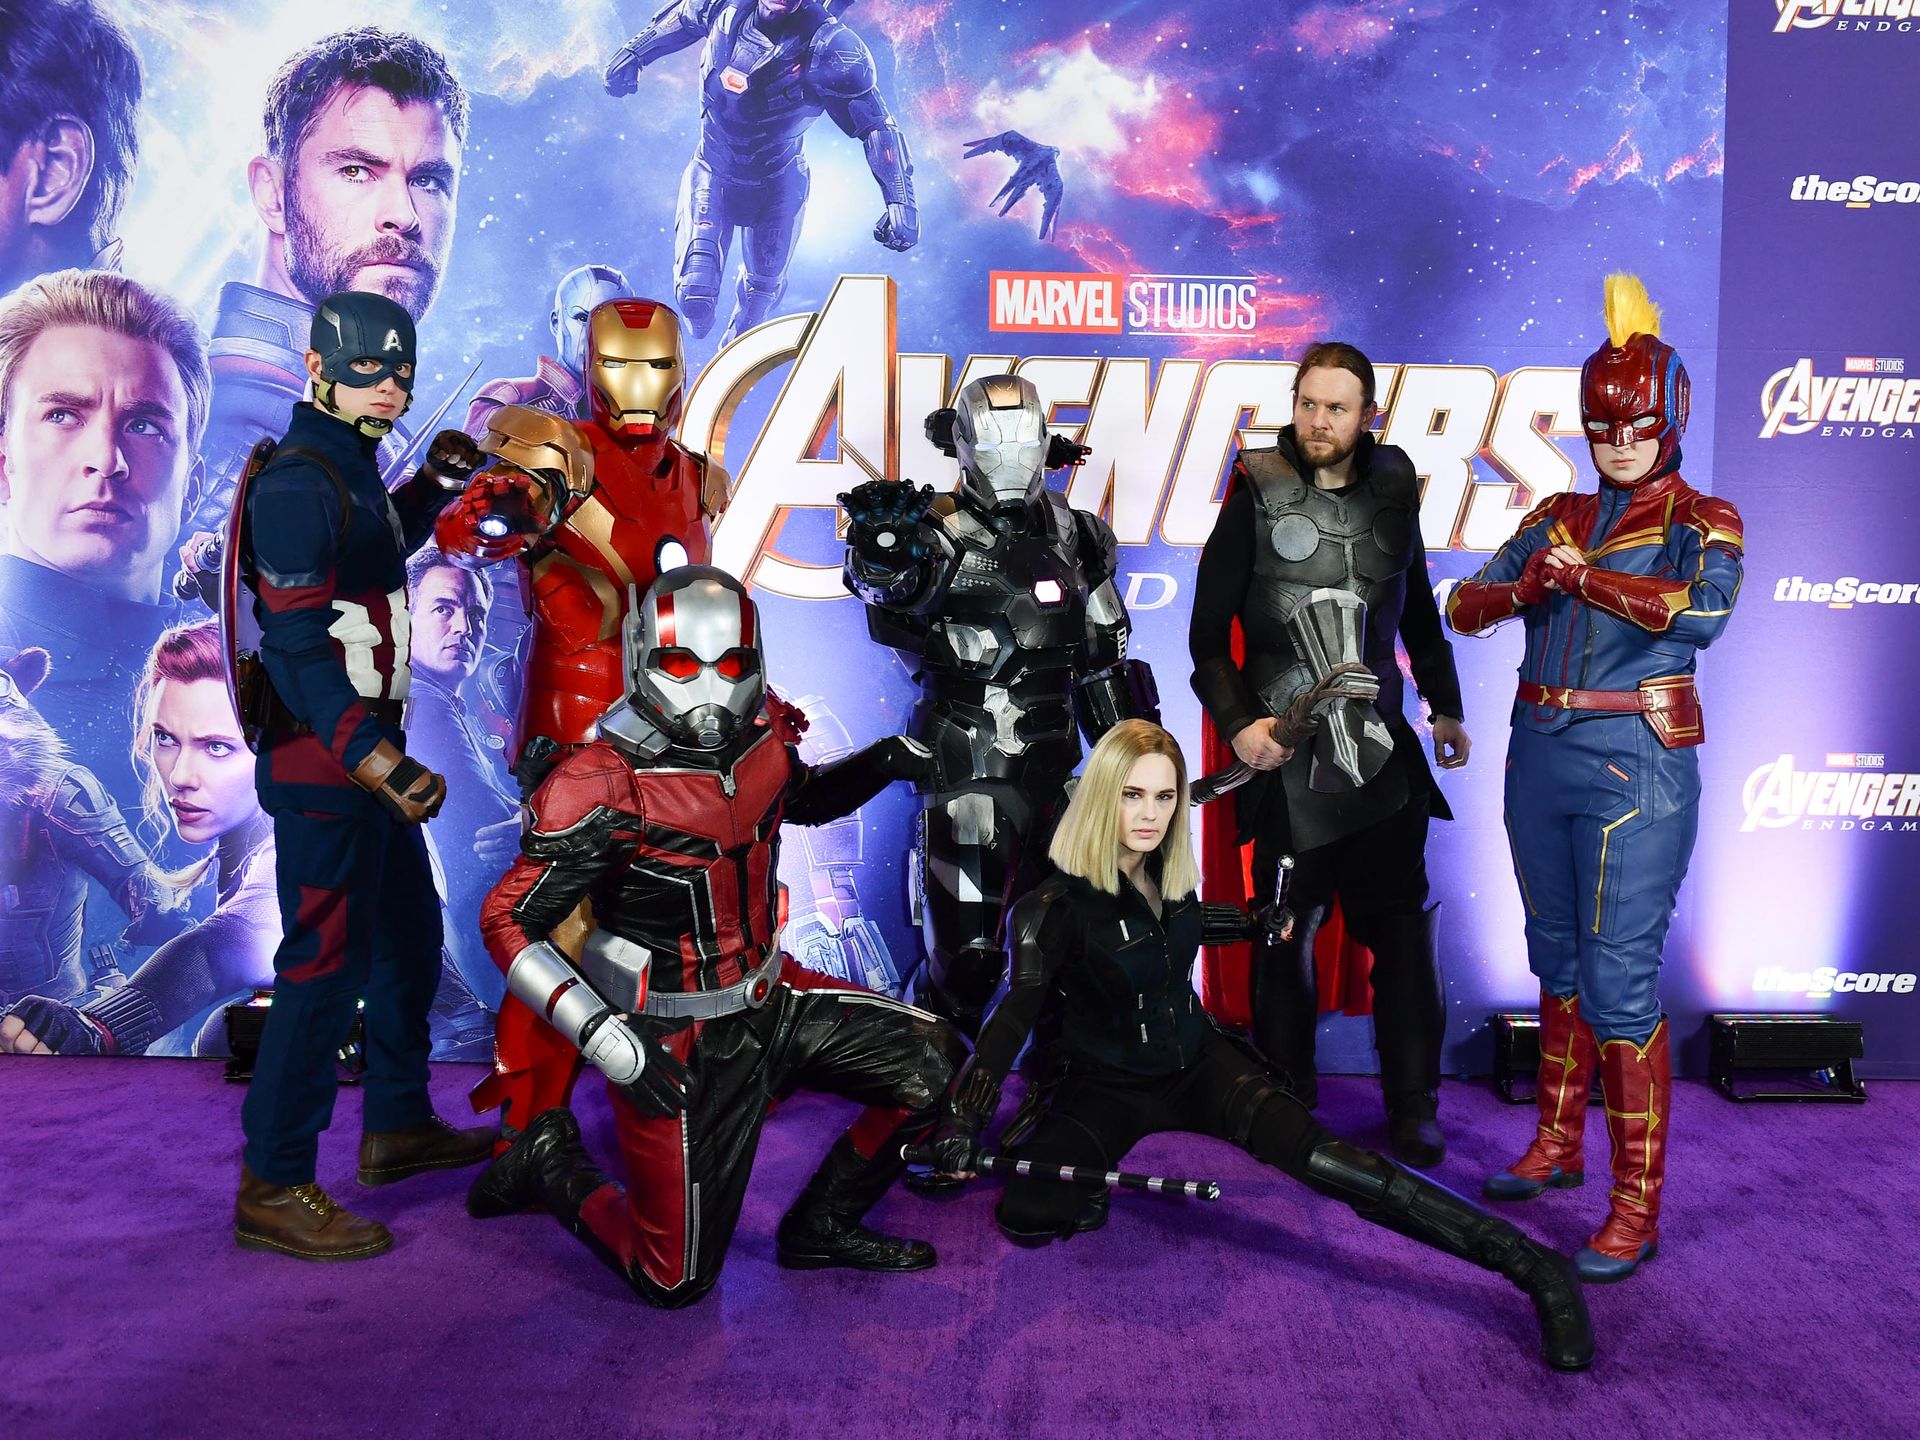 Avengers: Endgame' shatters records with $1.2 billion opening